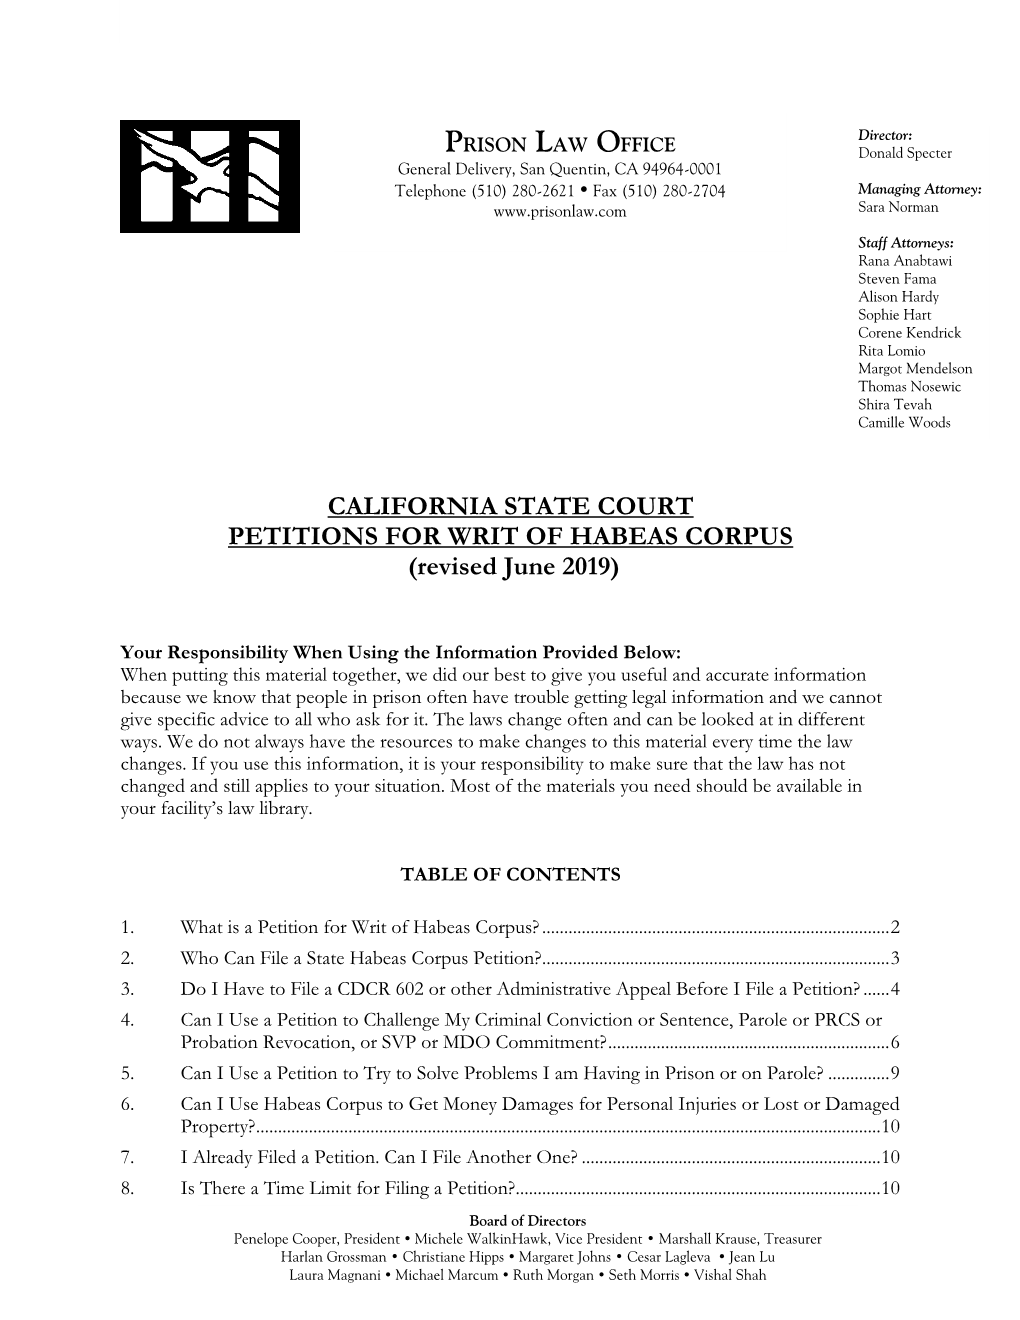 CALIFORNIA STATE COURT PETITIONS for WRIT of HABEAS CORPUS (Revised June 2019)